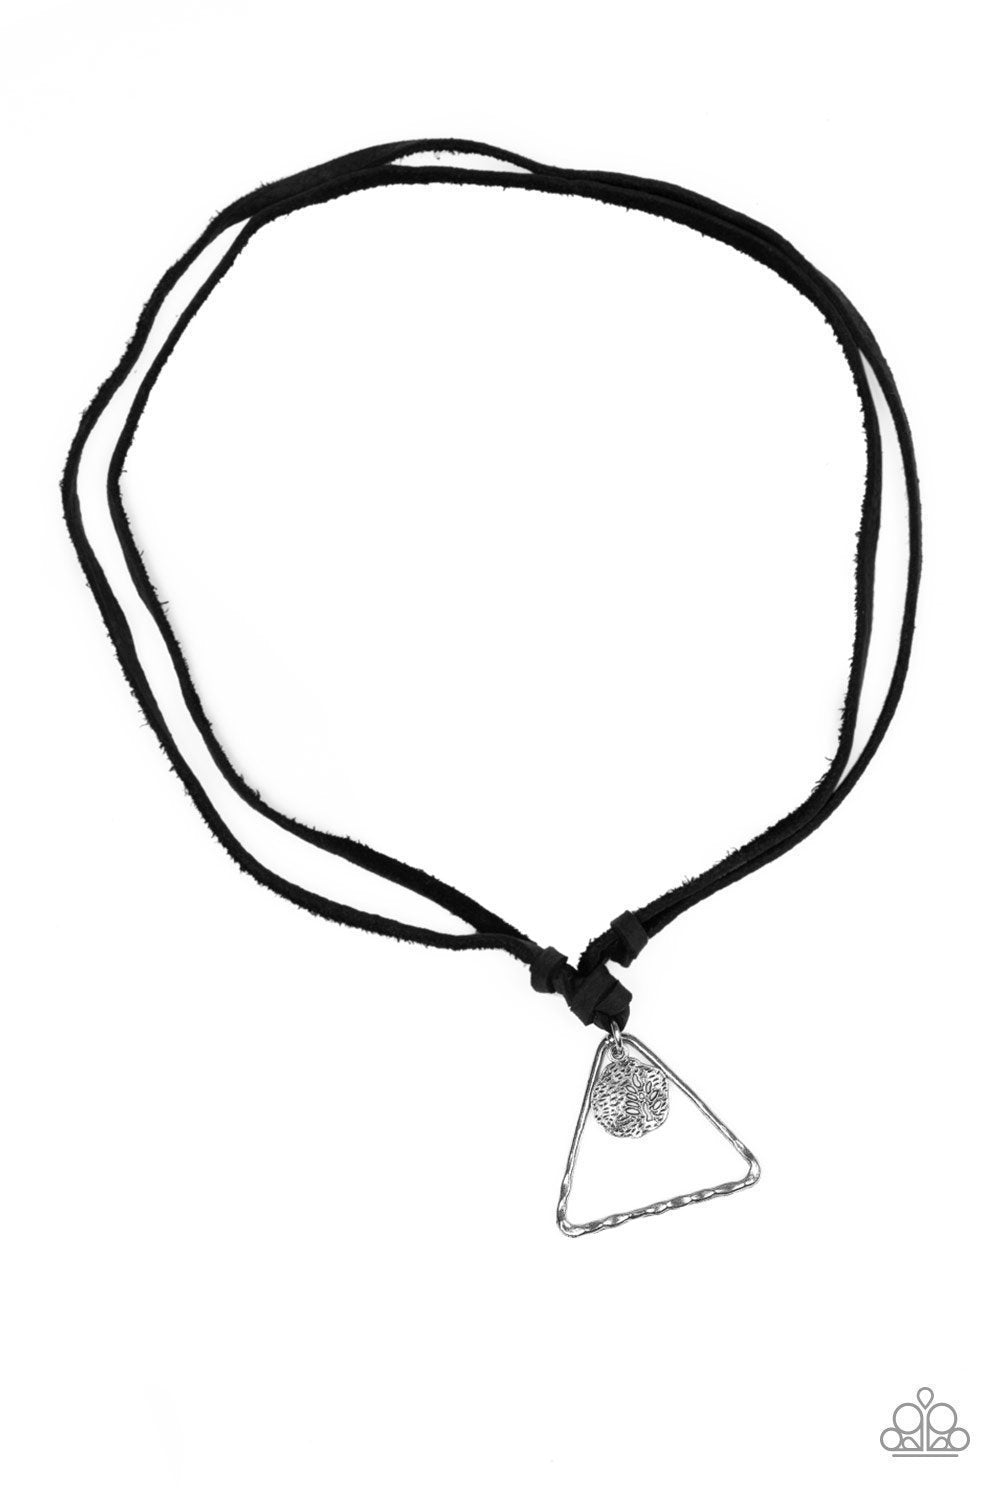 Terra Traverse Black and Silver Urban Necklace - Paparazzi Accessories-CarasShop.com - $5 Jewelry by Cara Jewels